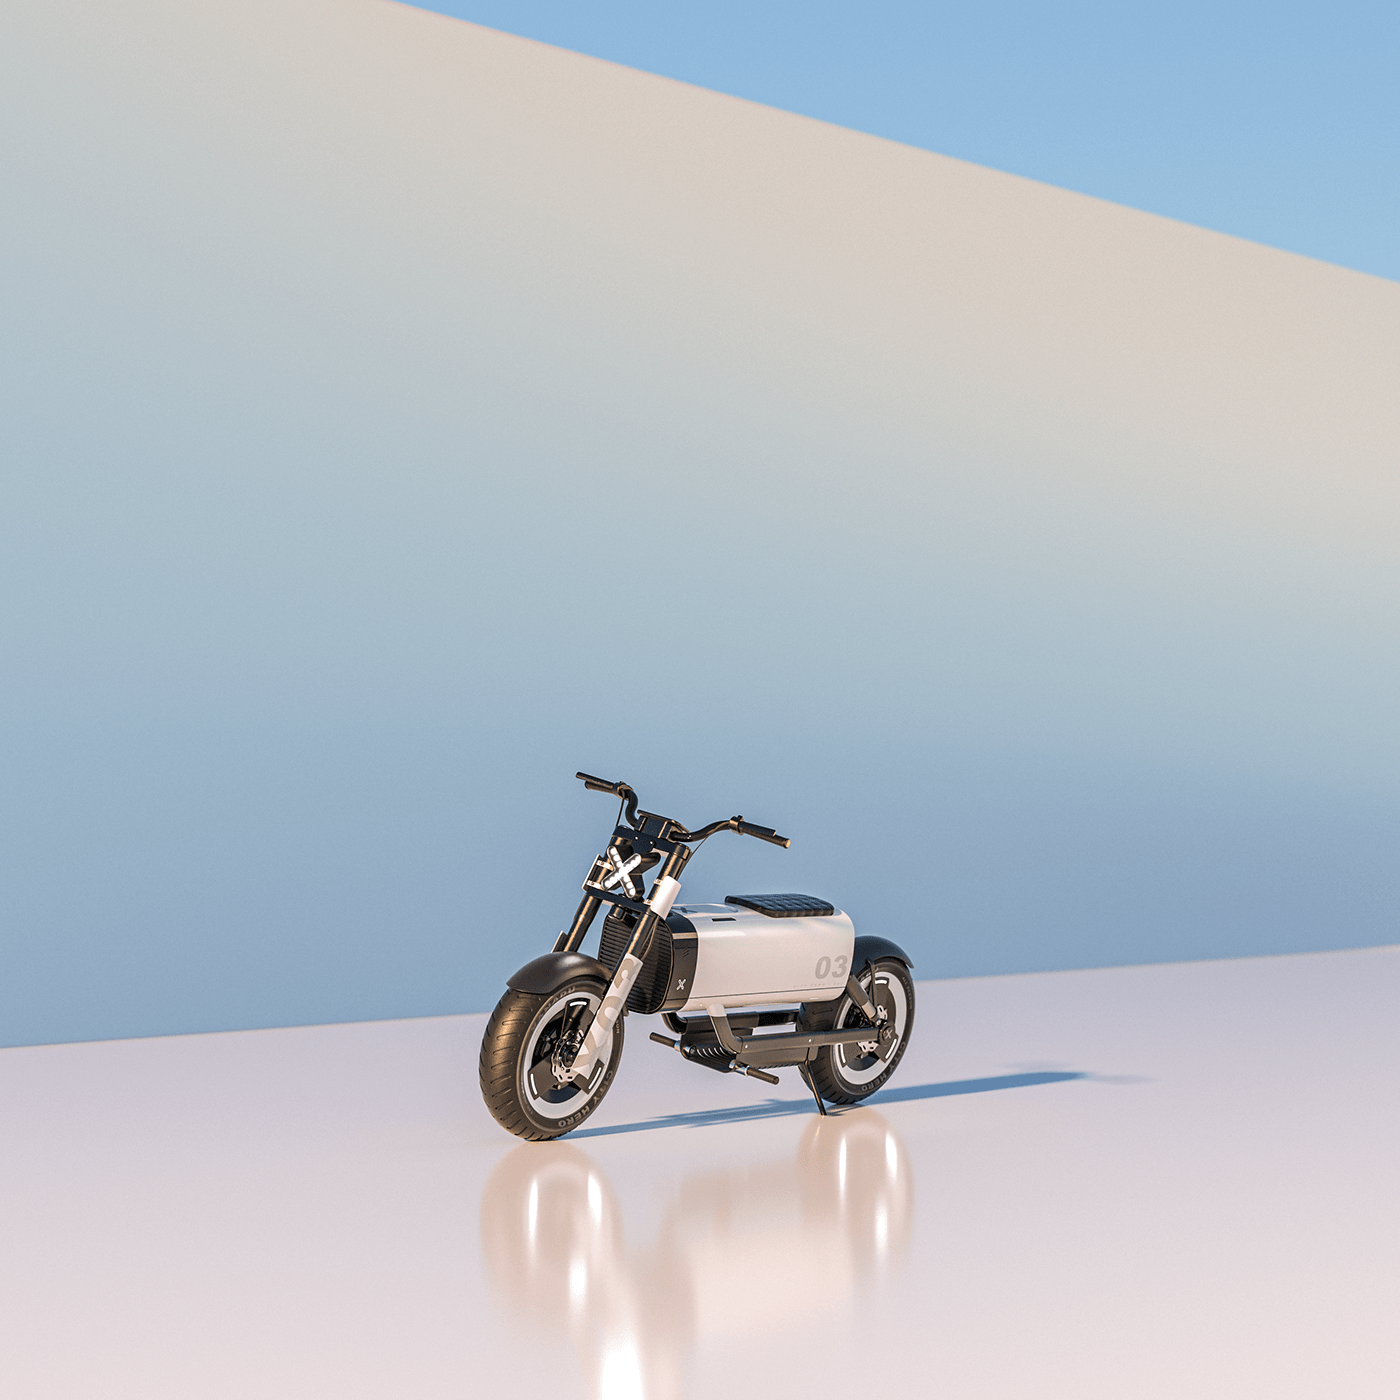 design motorcycle Render model Fashion  product design  e-scooter